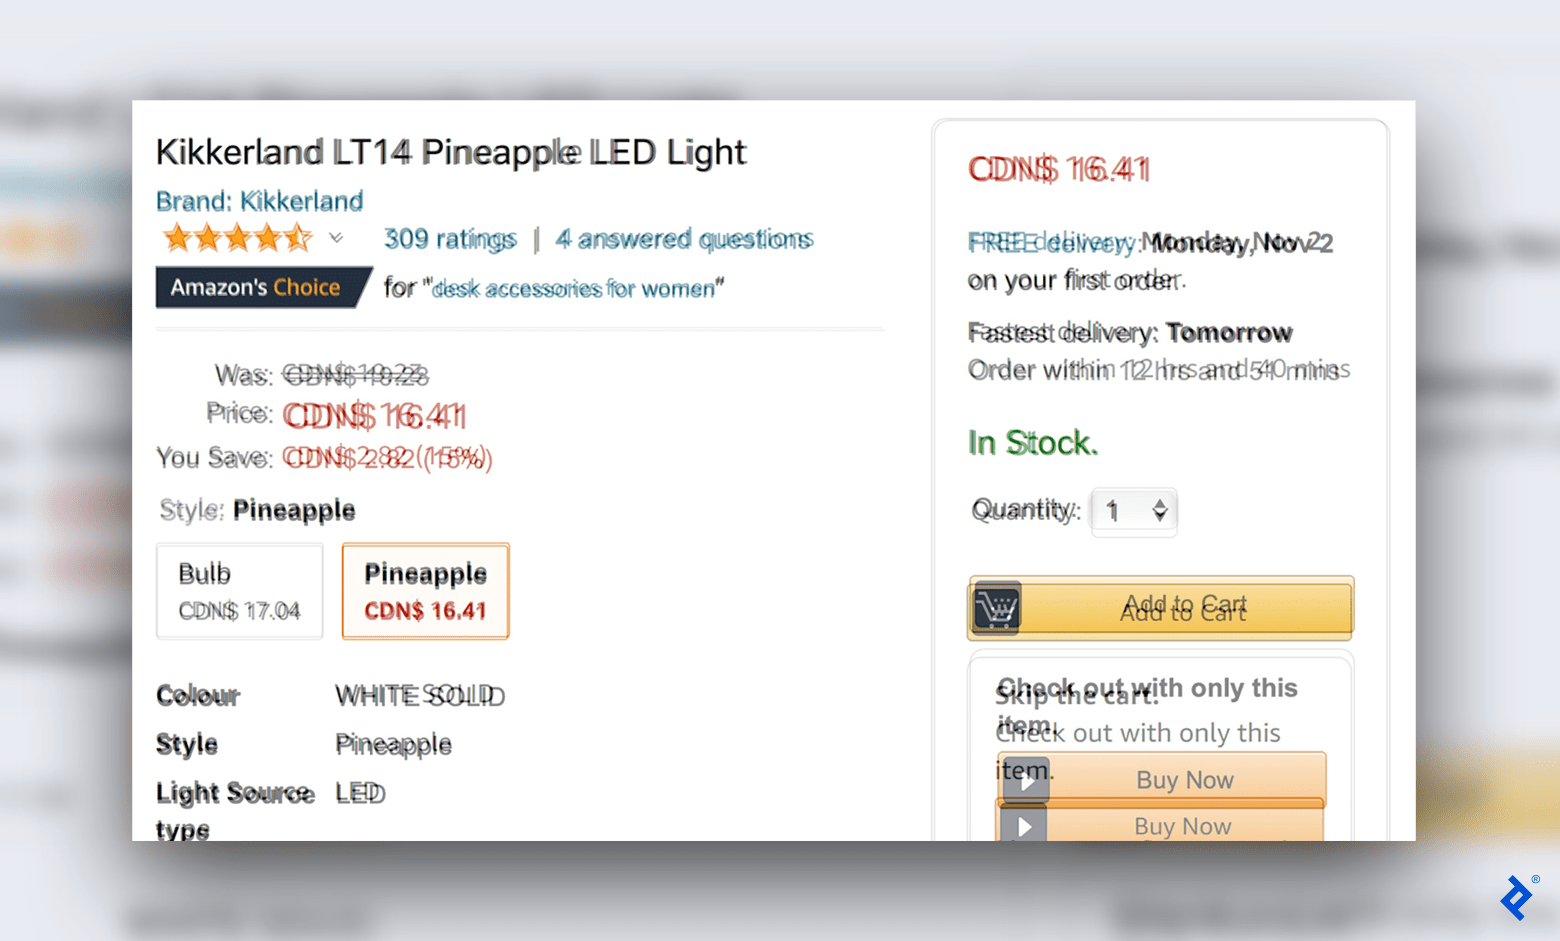 The same Amazon product listing page on a PC and a Mac overlaps to show the slight browser differences.